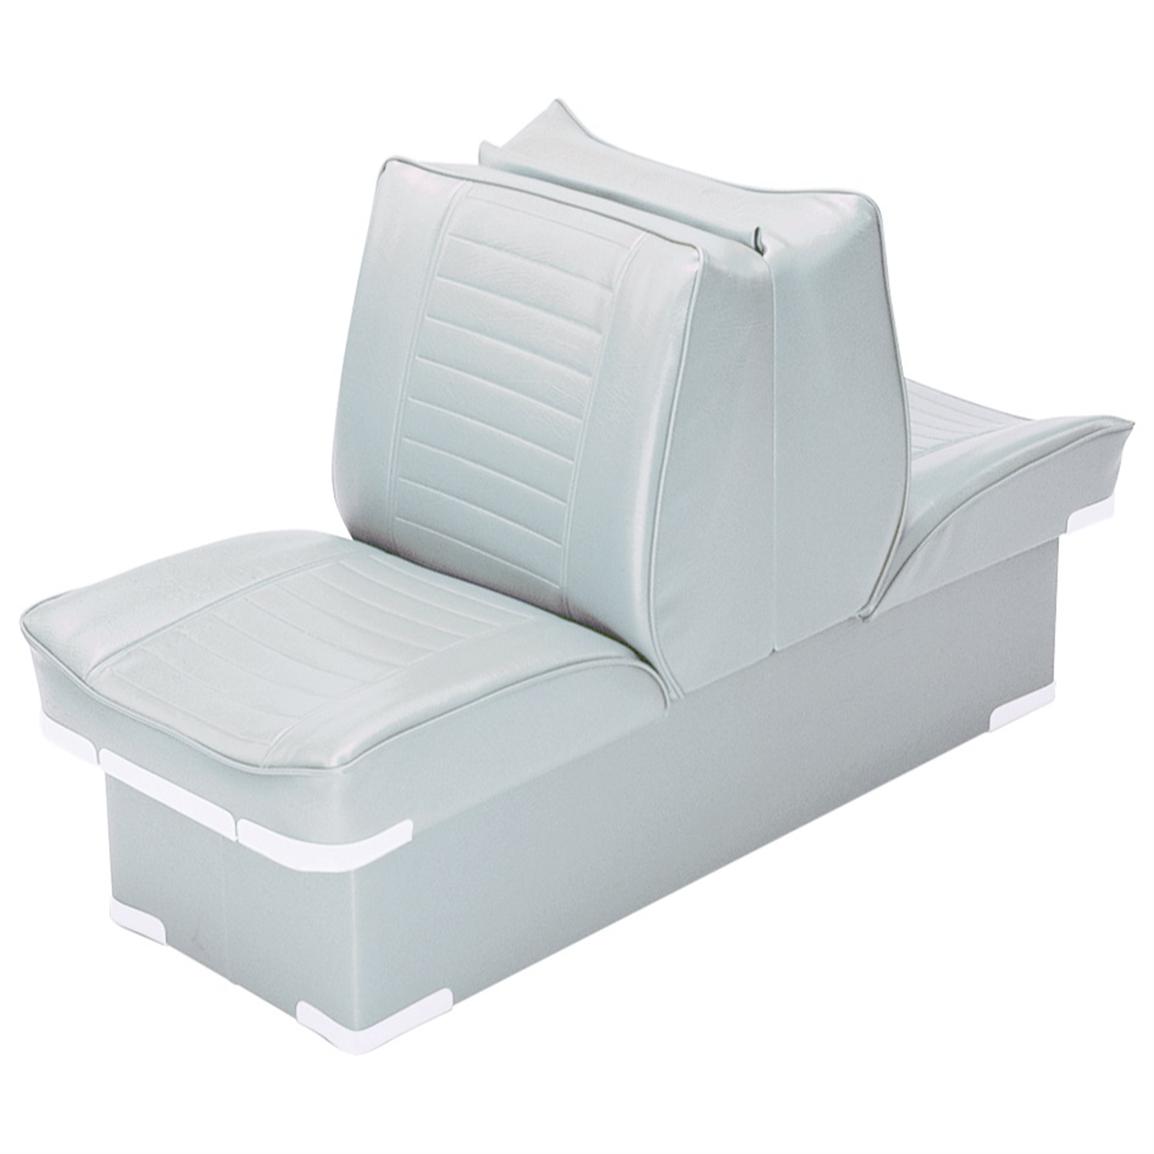 Wise Boat Lounge Seat - 96441, Fold Down Seats at ...